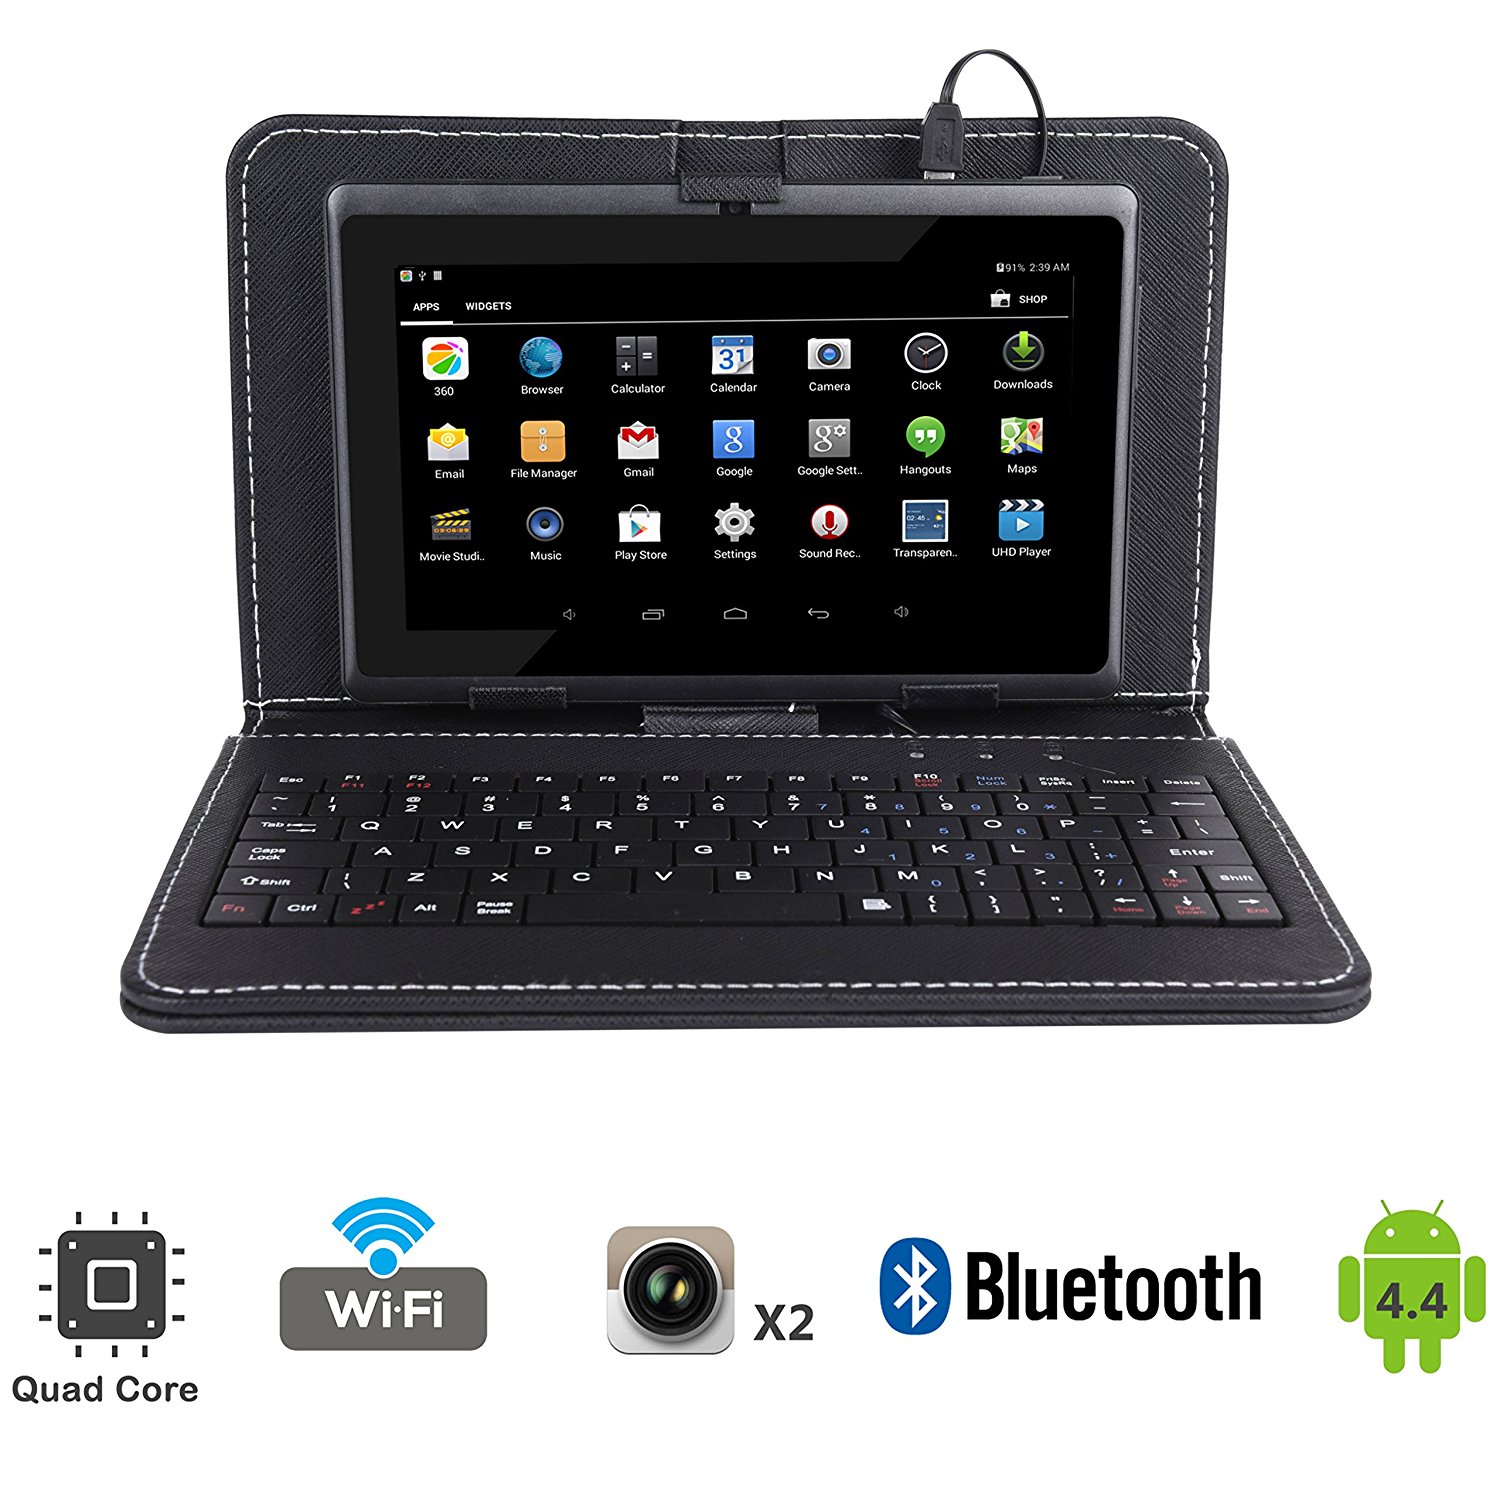 Tagital T7X 7" Quad Core Android Tablet PC Bundled with Keyboard Case - image 1 of 8